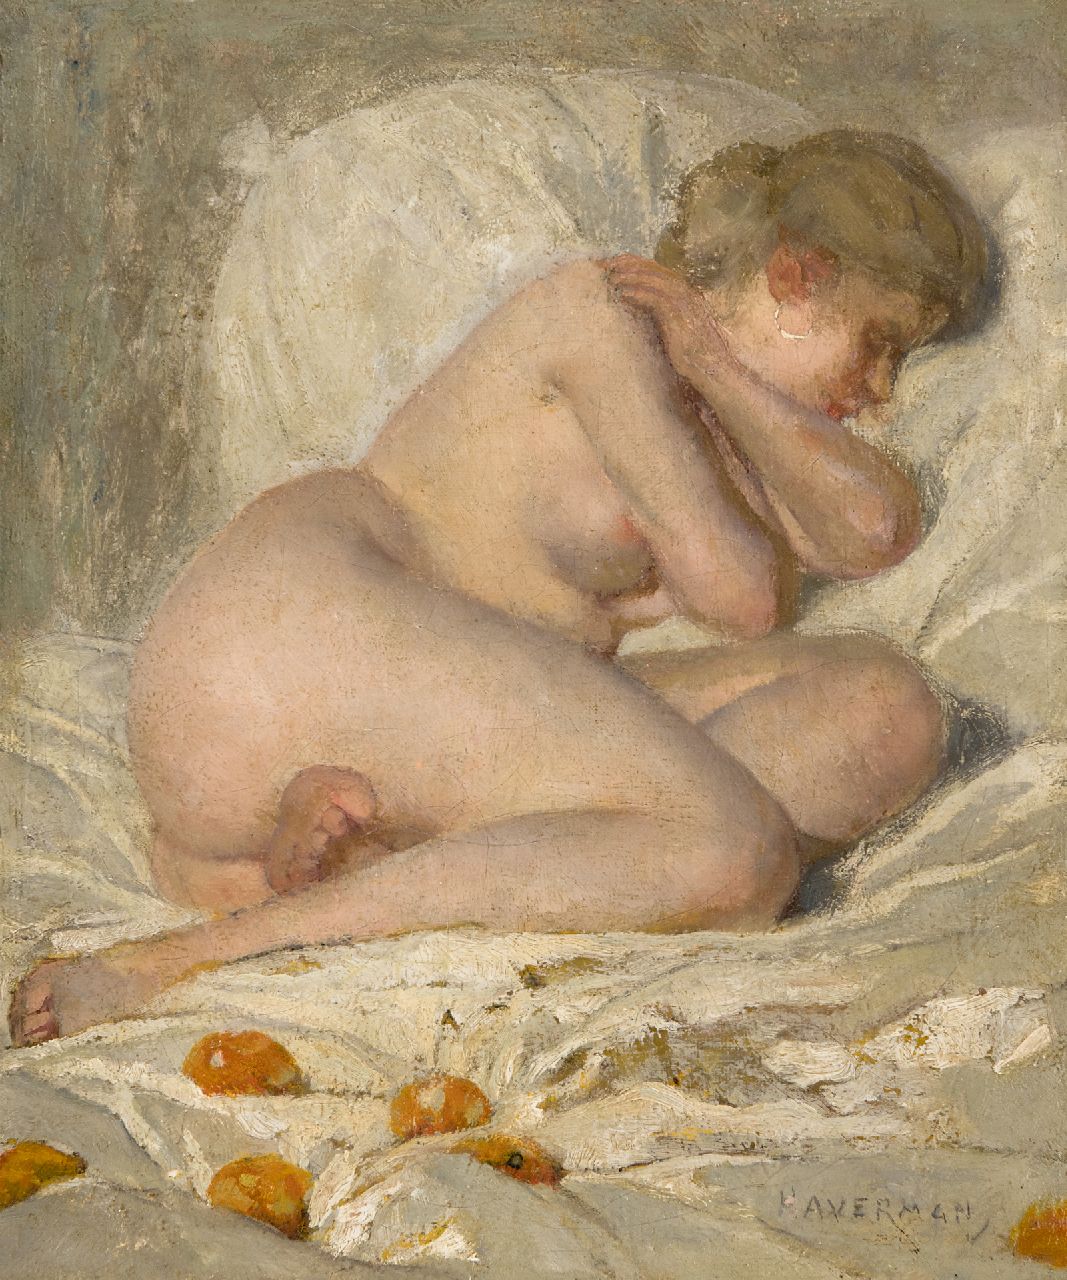 Haverman H.J.  | Hendrik Johannes Haverman | Paintings offered for sale | Sleeping nude, oil on canvas 30.5 x 25.7 cm, signed l.r.